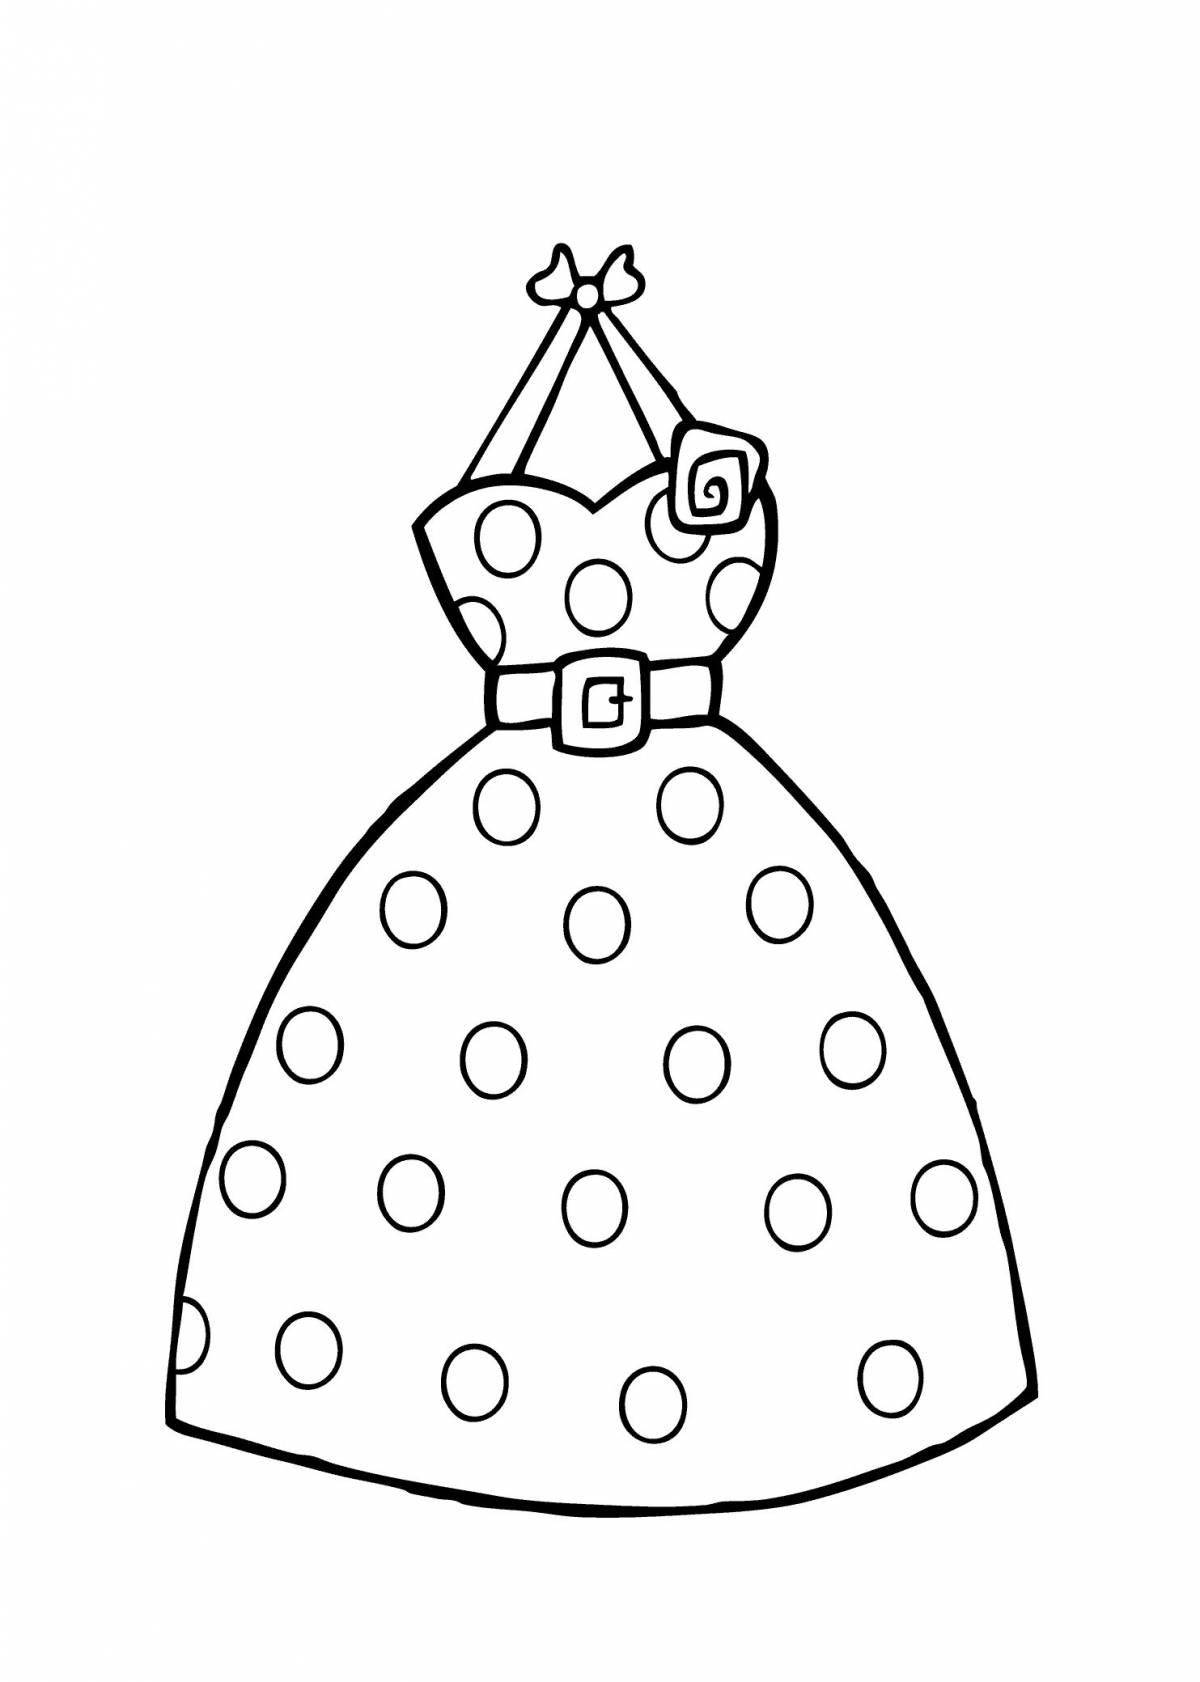 Coloring page shiny dress for mom